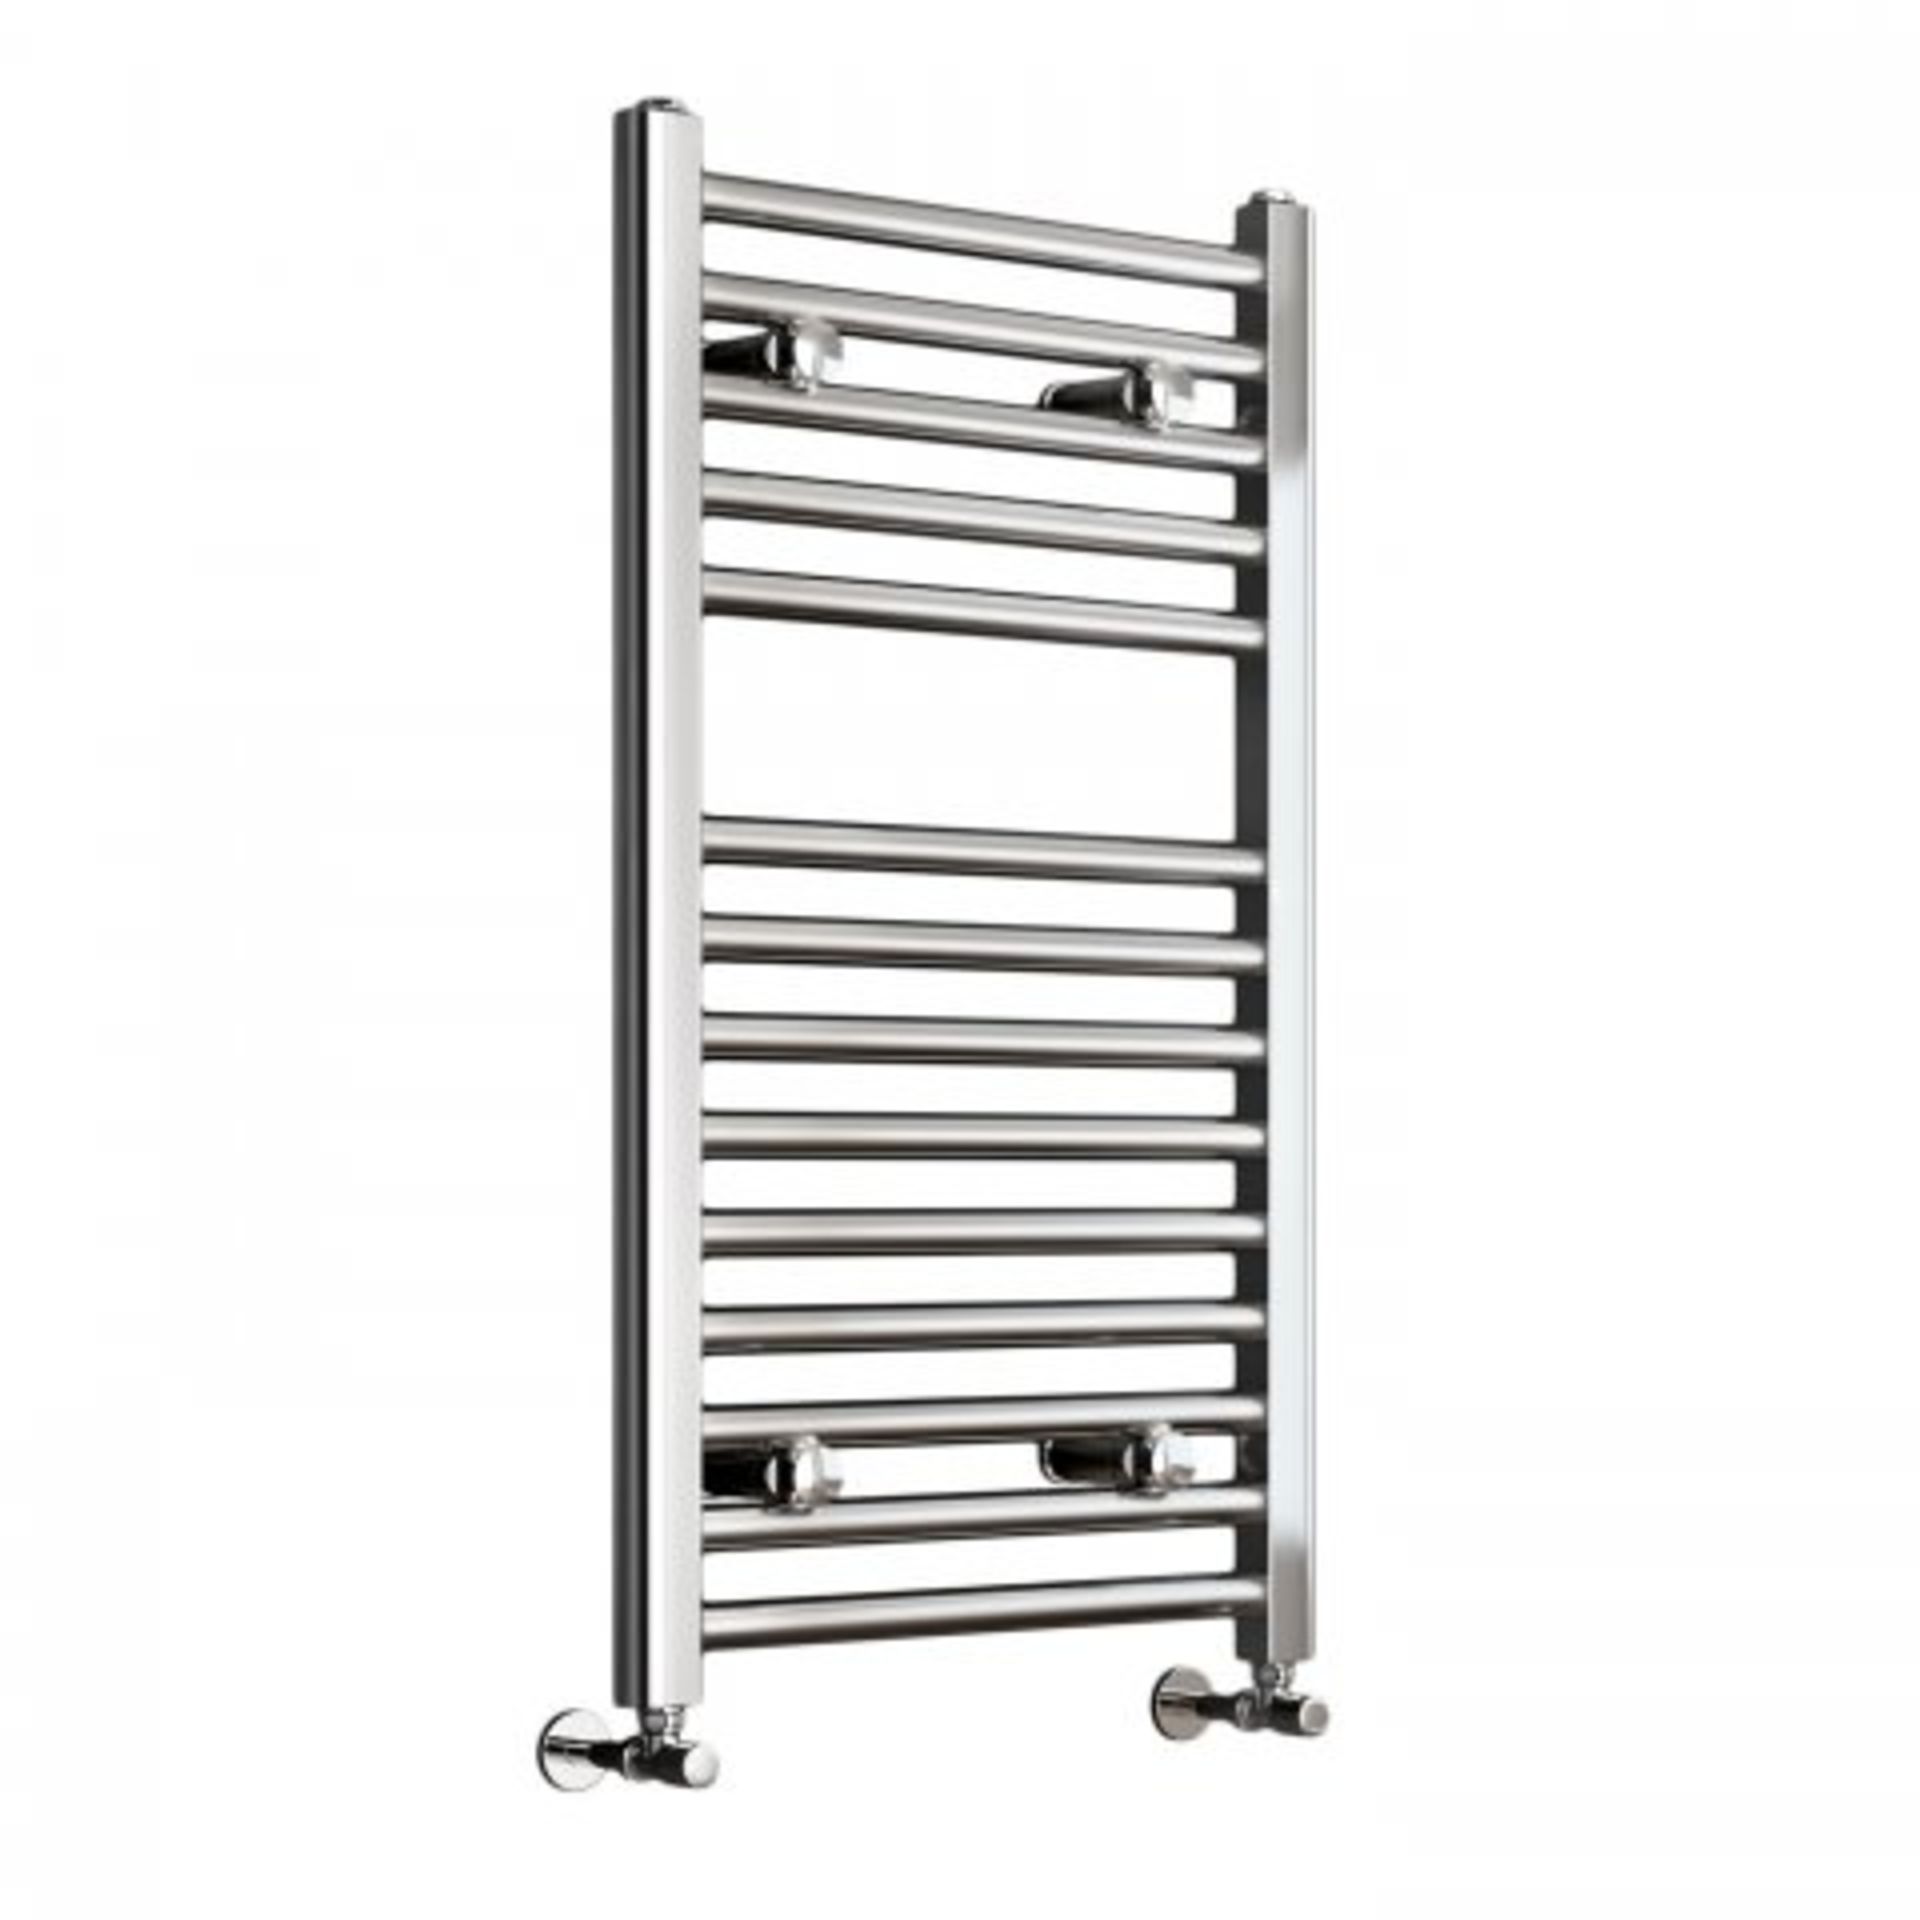 (I26) 800x450mm - 25mm Tubes - Chrome Heated Straight Rail Ladder Towel Radiators . Benefit from the - Image 3 of 3